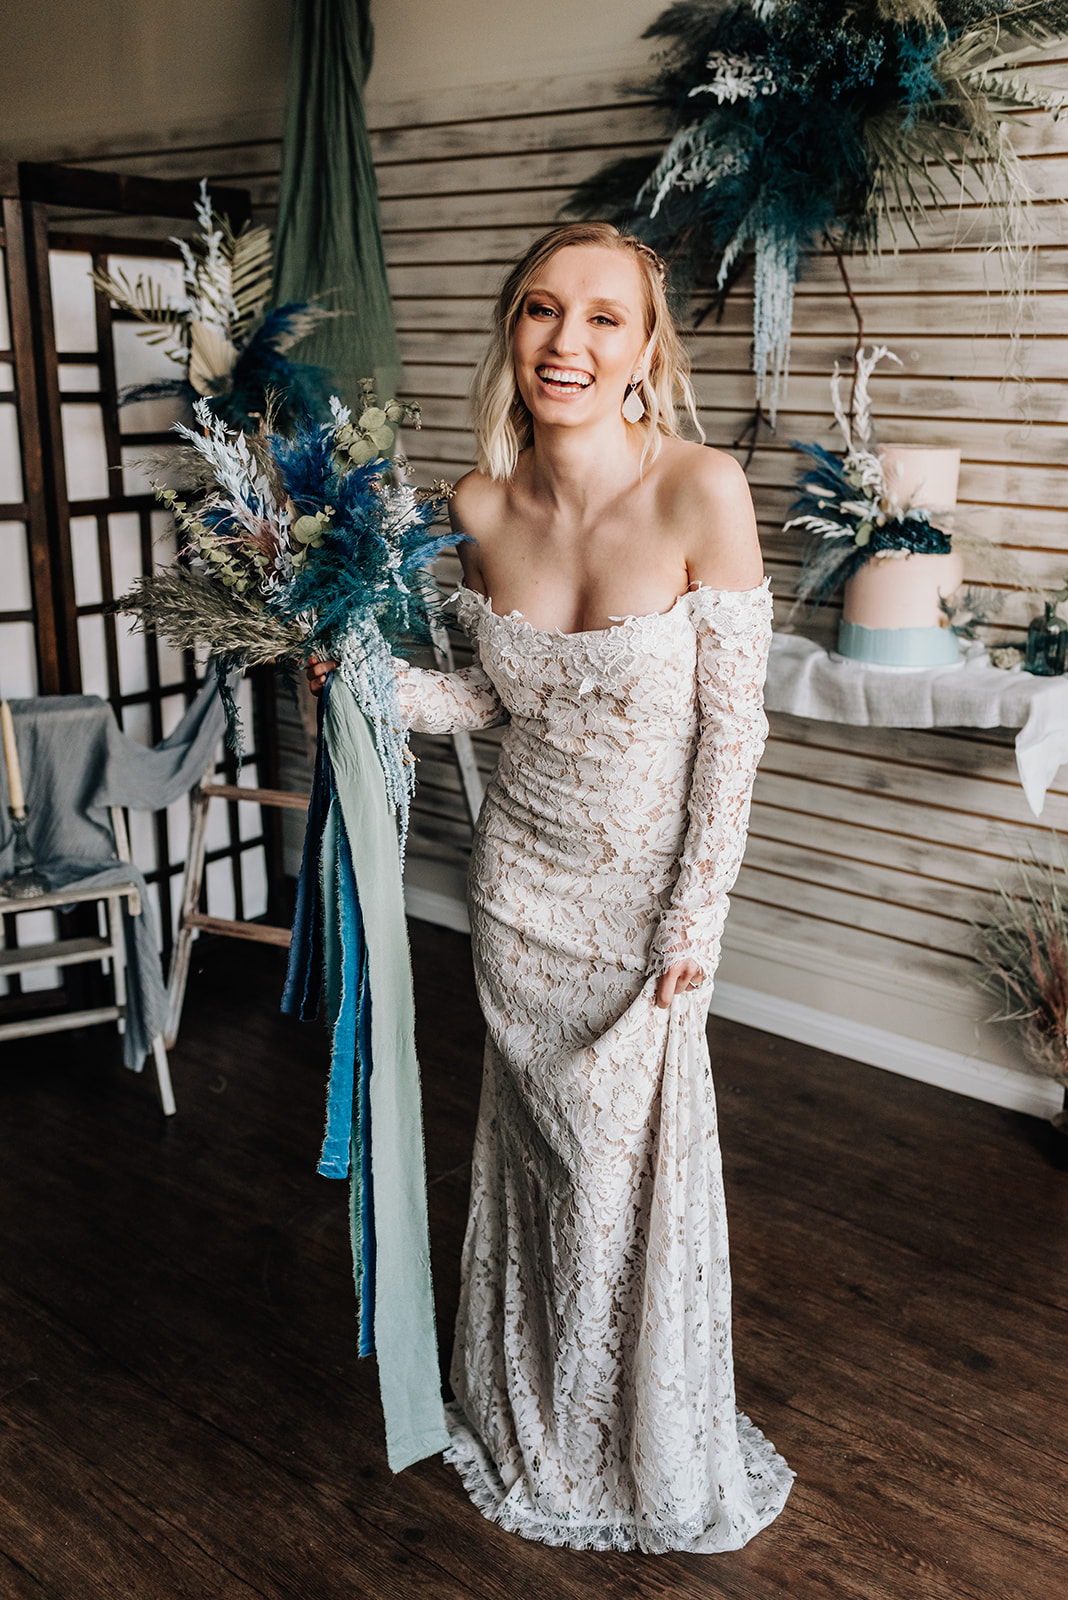 Bride in a lace gown and clay earrings poses with a bohemian bridal bouquet with deep blue and dark teal floral accents